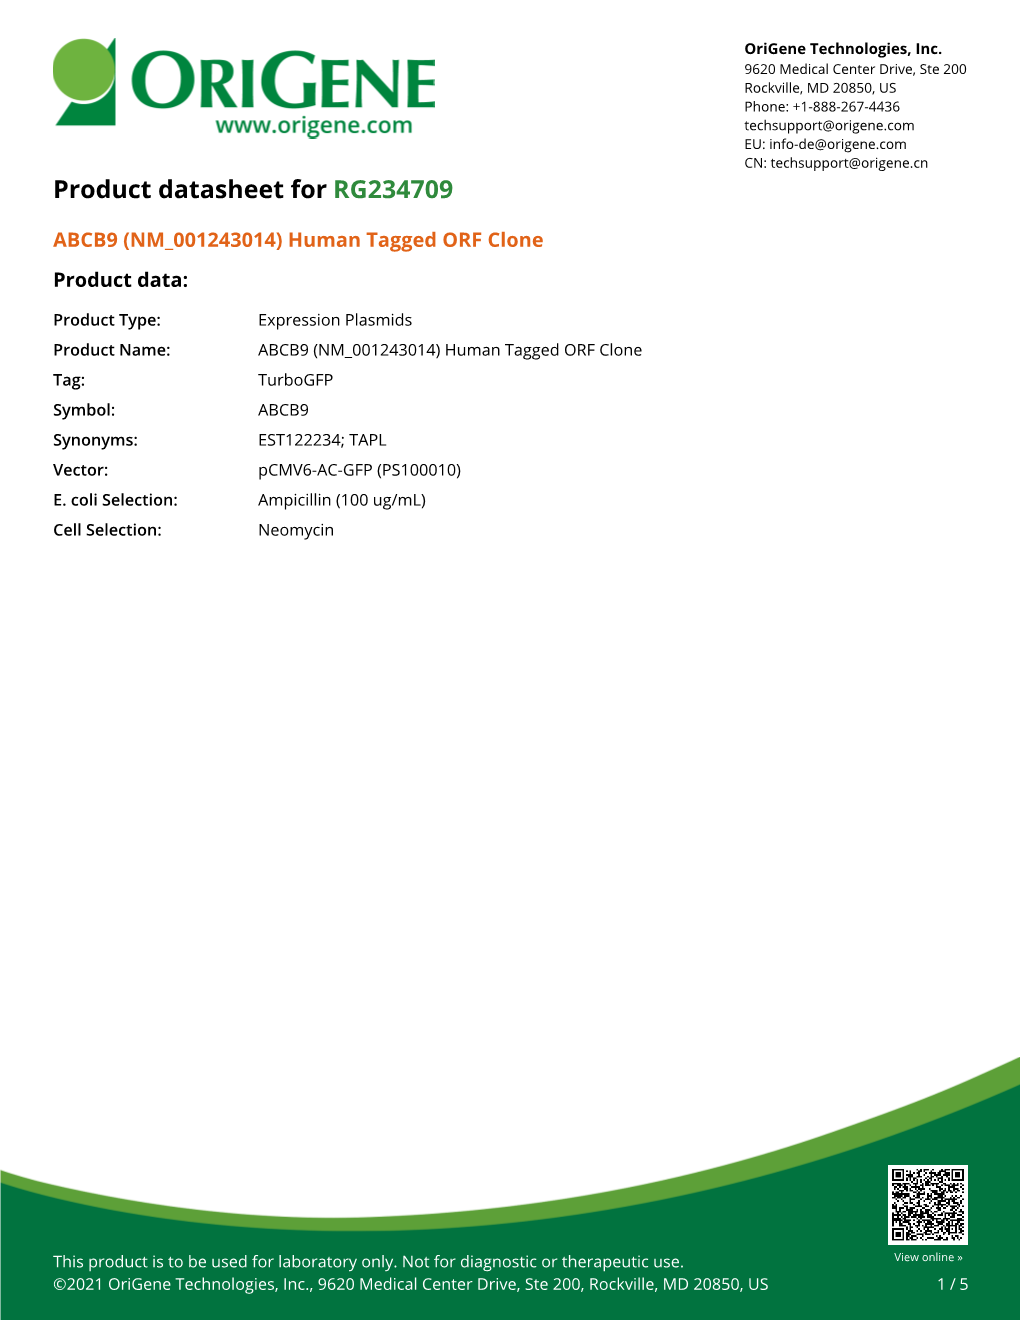 ABCB9 (NM 001243014) Human Tagged ORF Clone Product Data